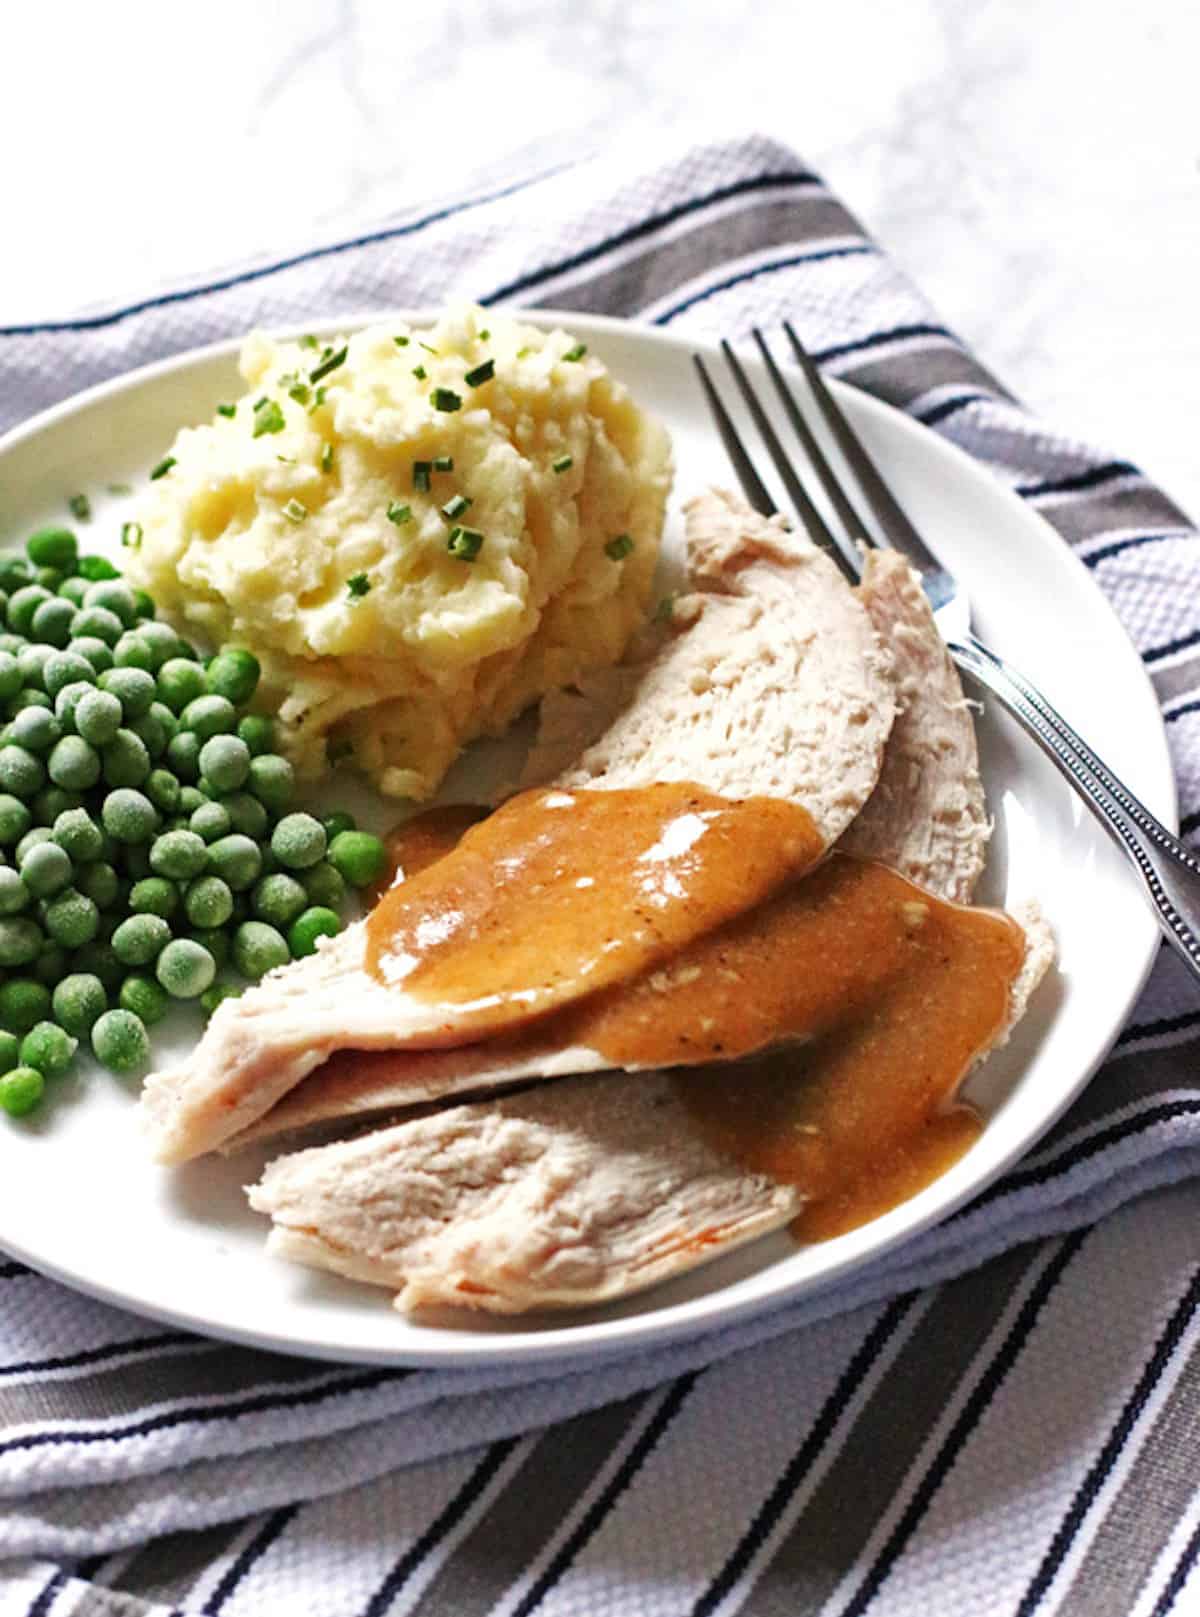 A plate of crockpot turkey breast with mashed potatoes and peas, smothered in gravy.